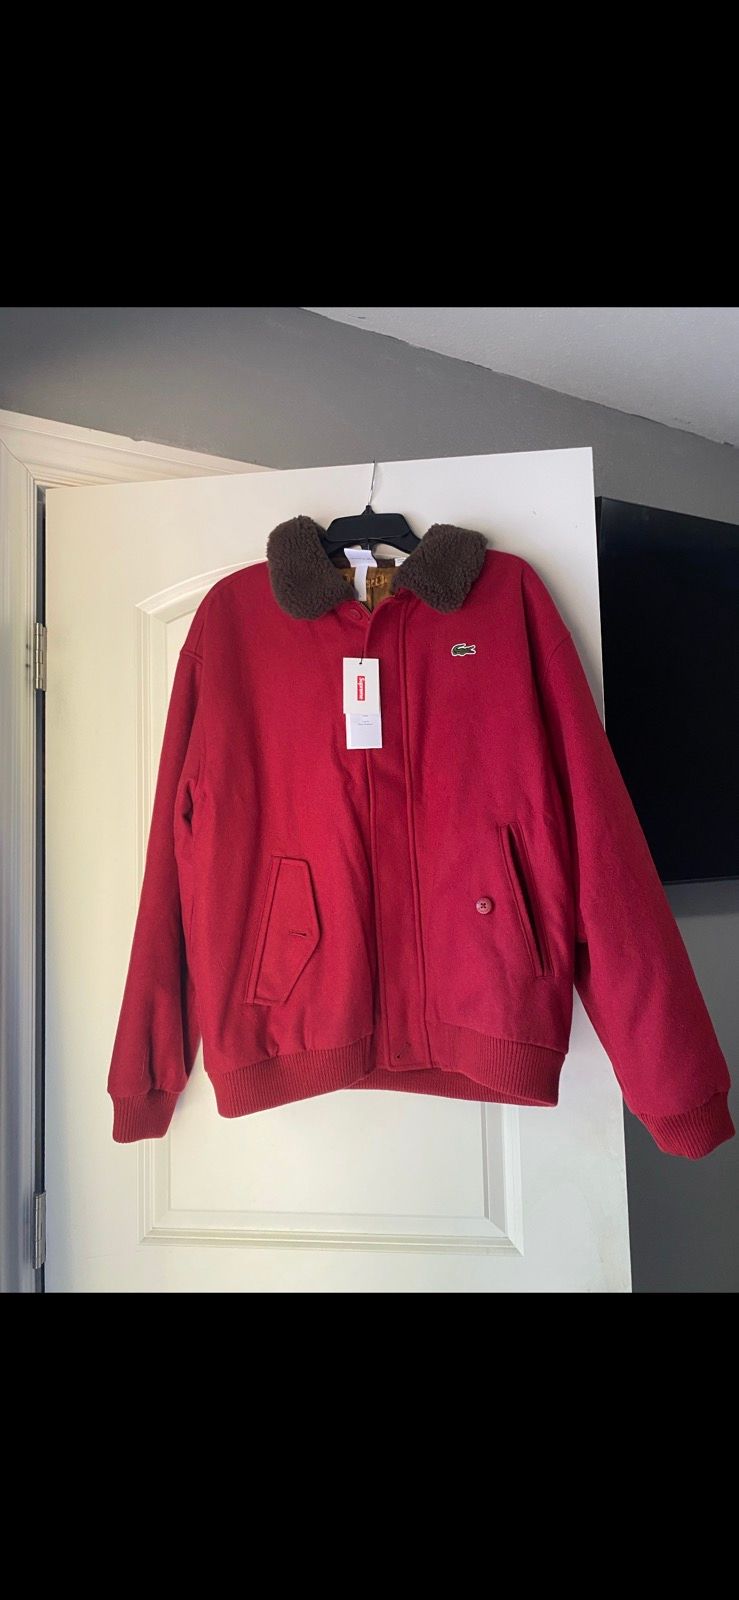 Supreme Supreme x Lacoste Wool Bomber Jacket in RED - M | Grailed